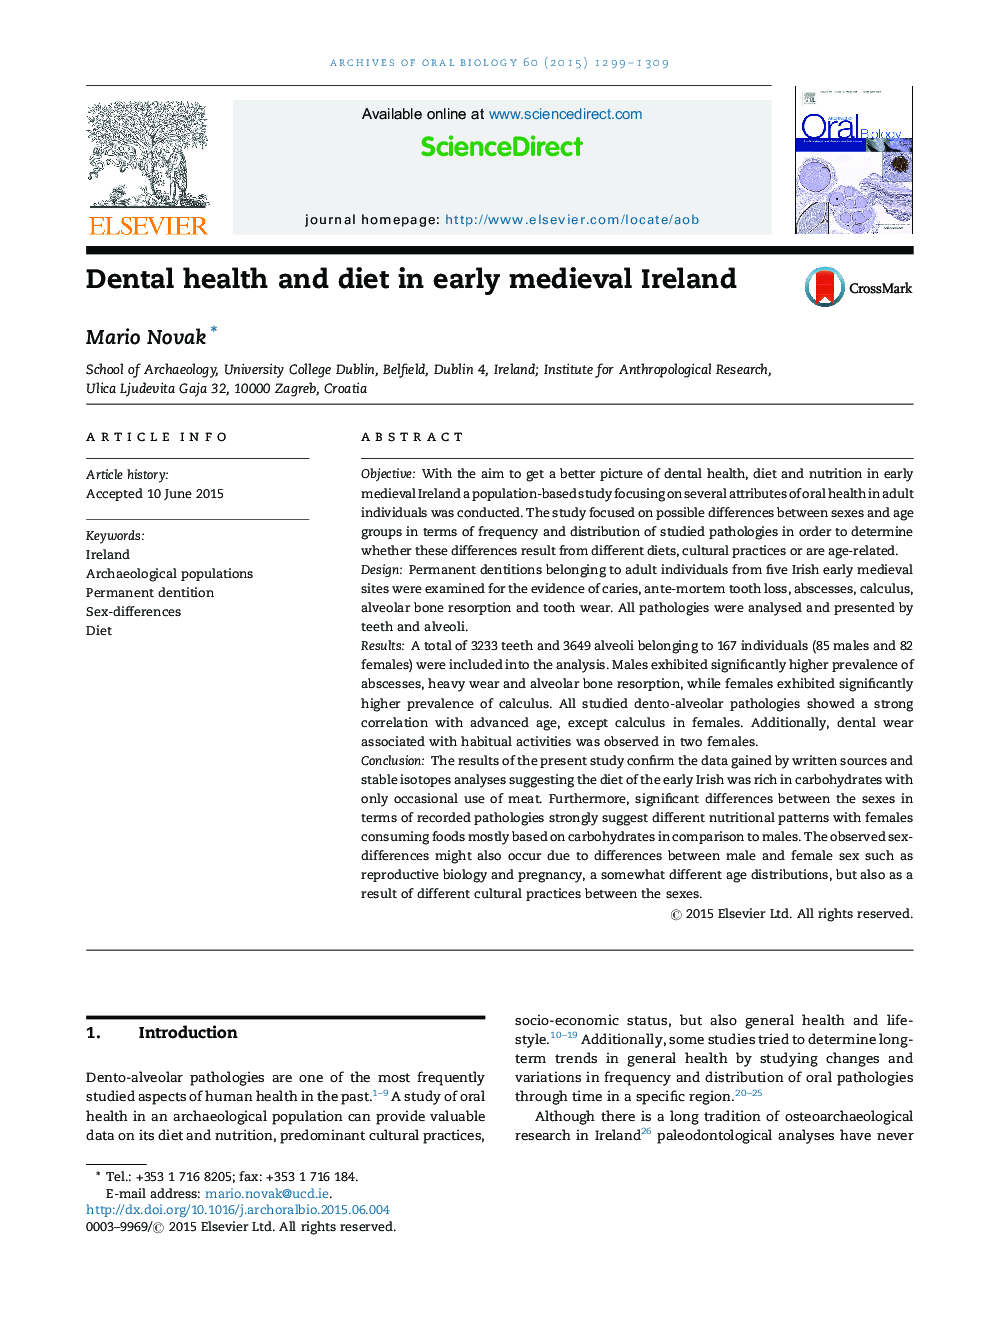 Dental health and diet in early medieval Ireland